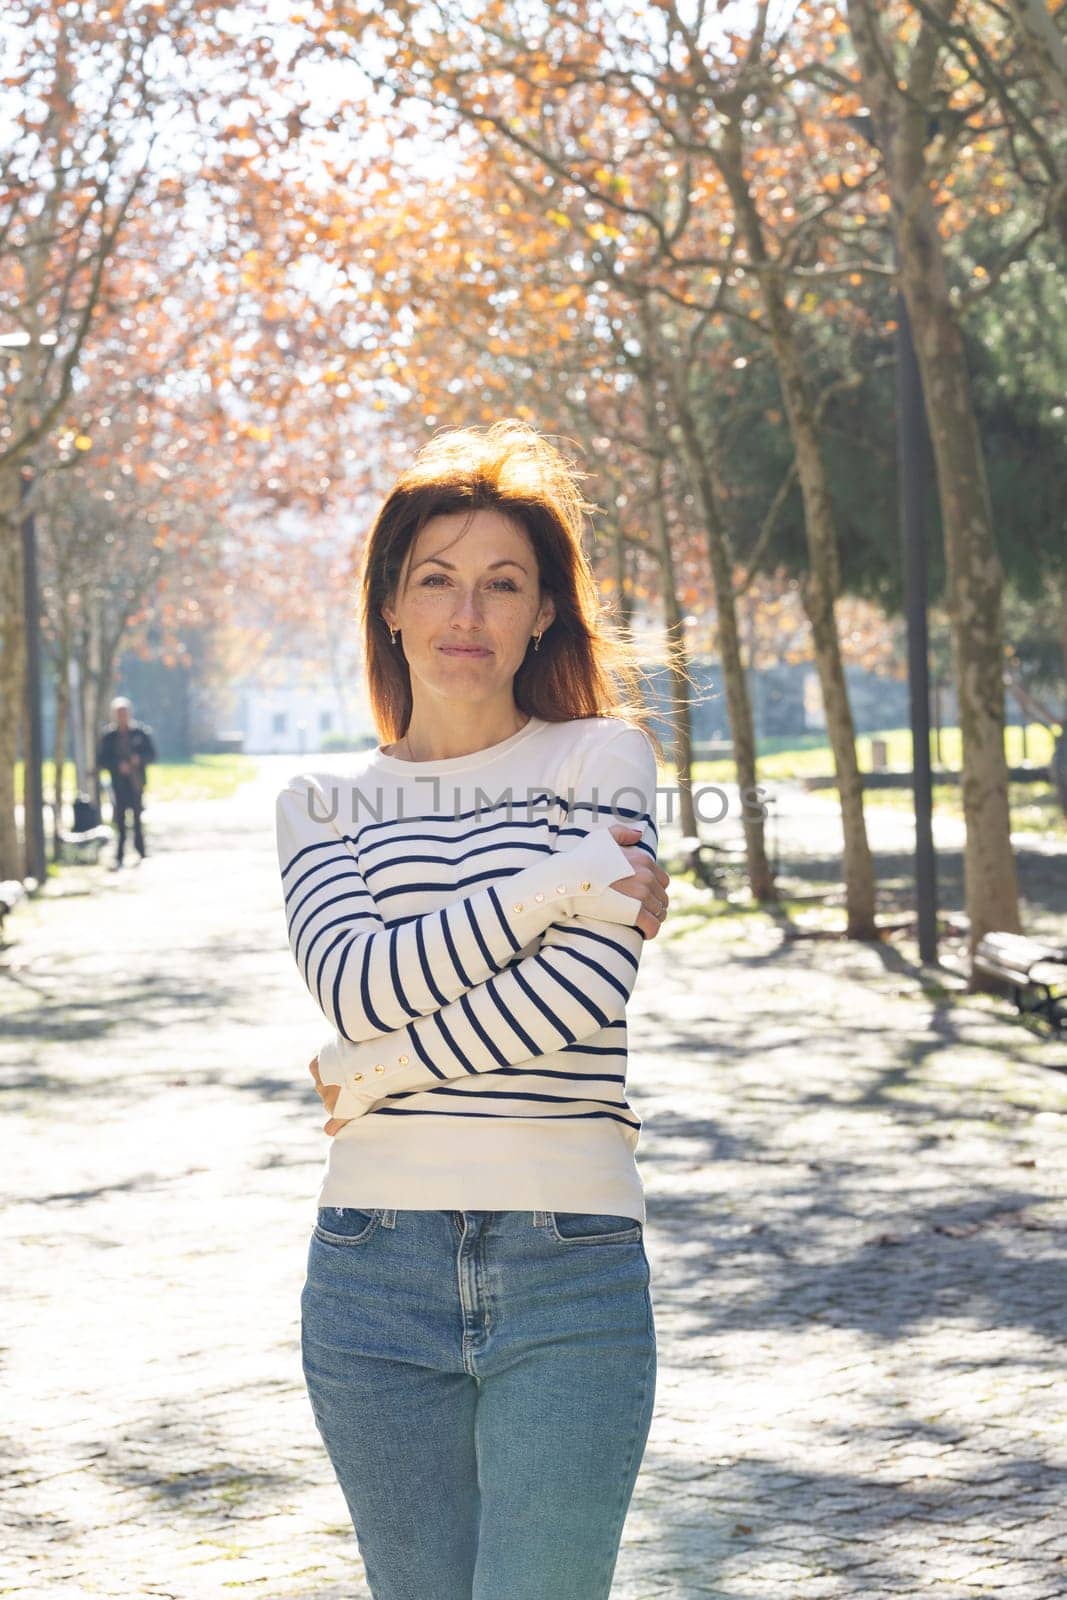 A woman wearing a striped sweater and jeans stands in a park. She is smiling and she is enjoying the day